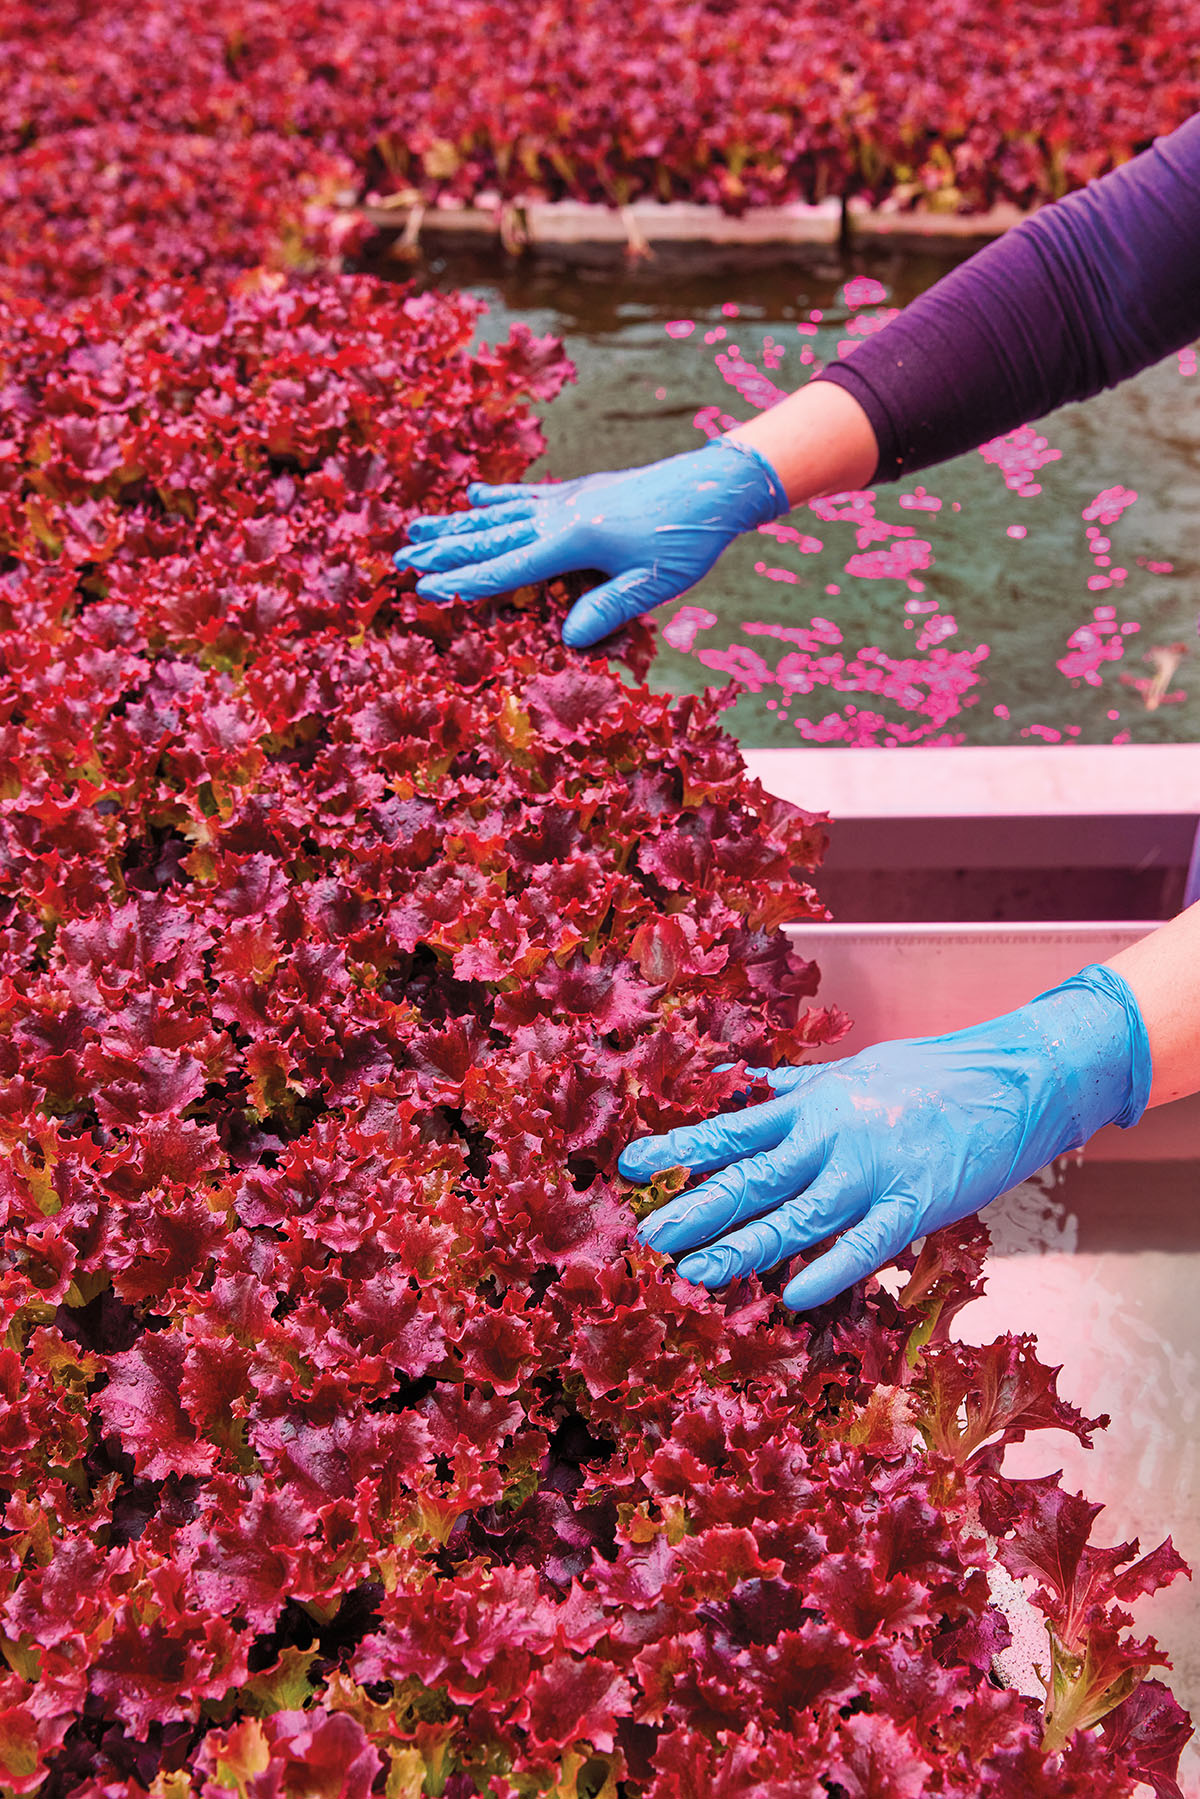 A person wearing blue gloves pushes a large mass of red lettuce